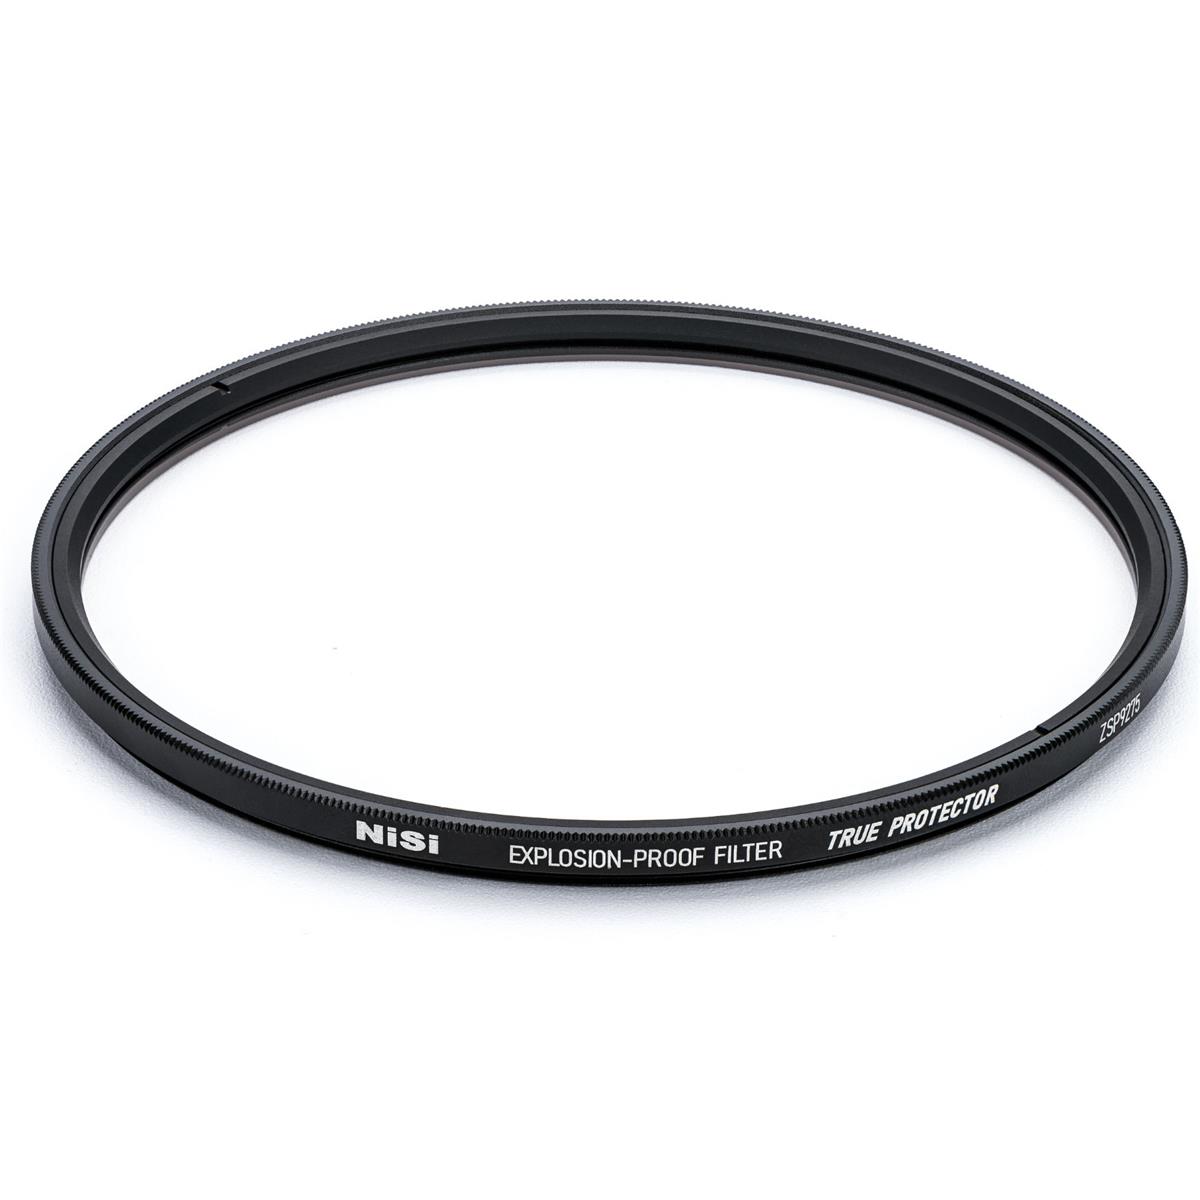 NiSi Cinema True Protector Explosion-Proof Filter for Zeiss Supreme Prime Lenses цена и фото